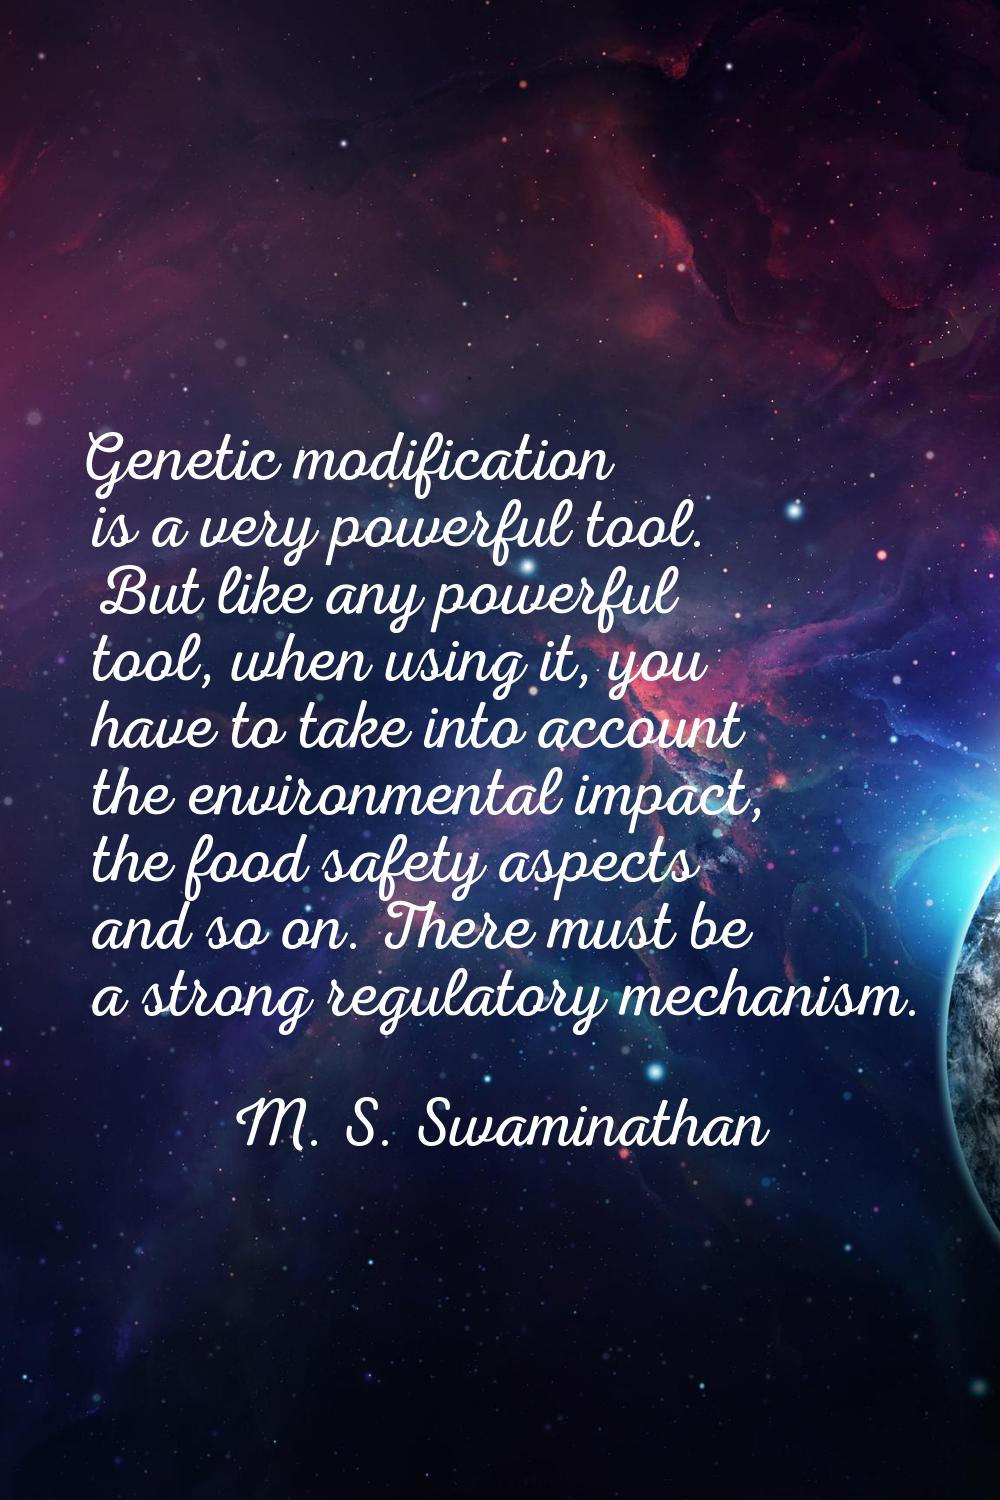 Genetic modification is a very powerful tool. But like any powerful tool, when using it, you have t